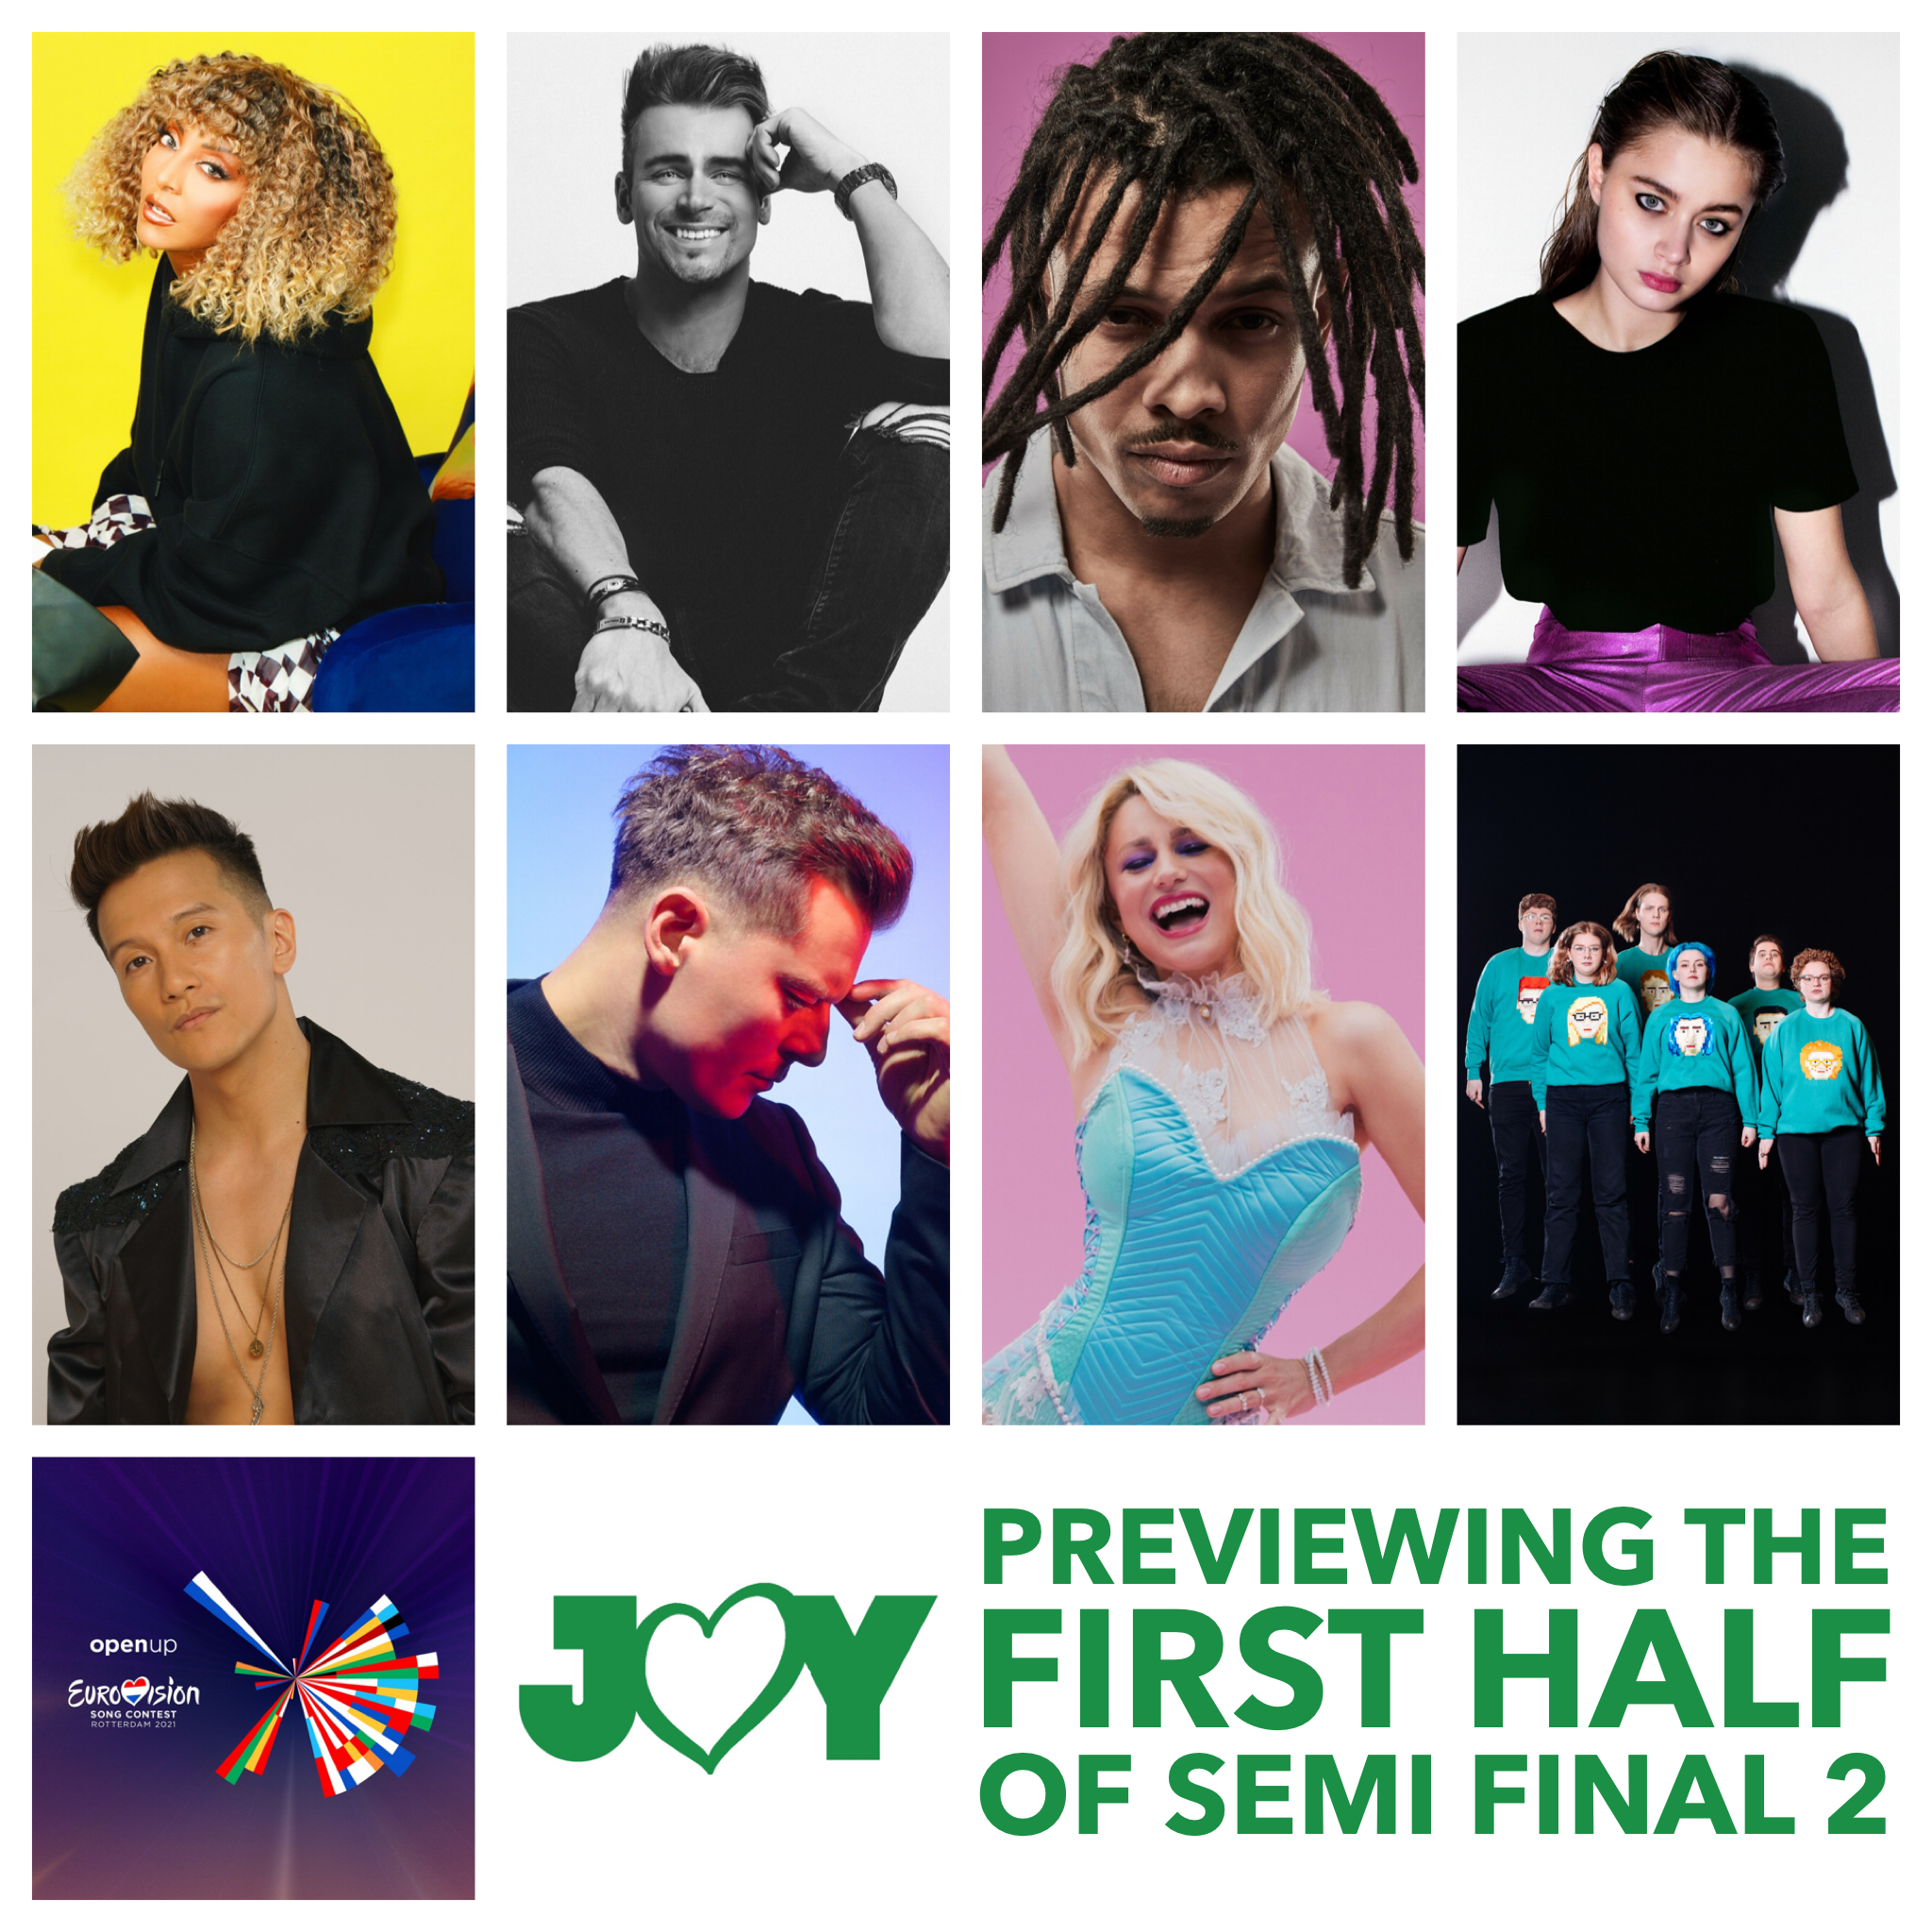 #OpenUp: Previewing the first half of Eurovision 2021 Semi Final 2